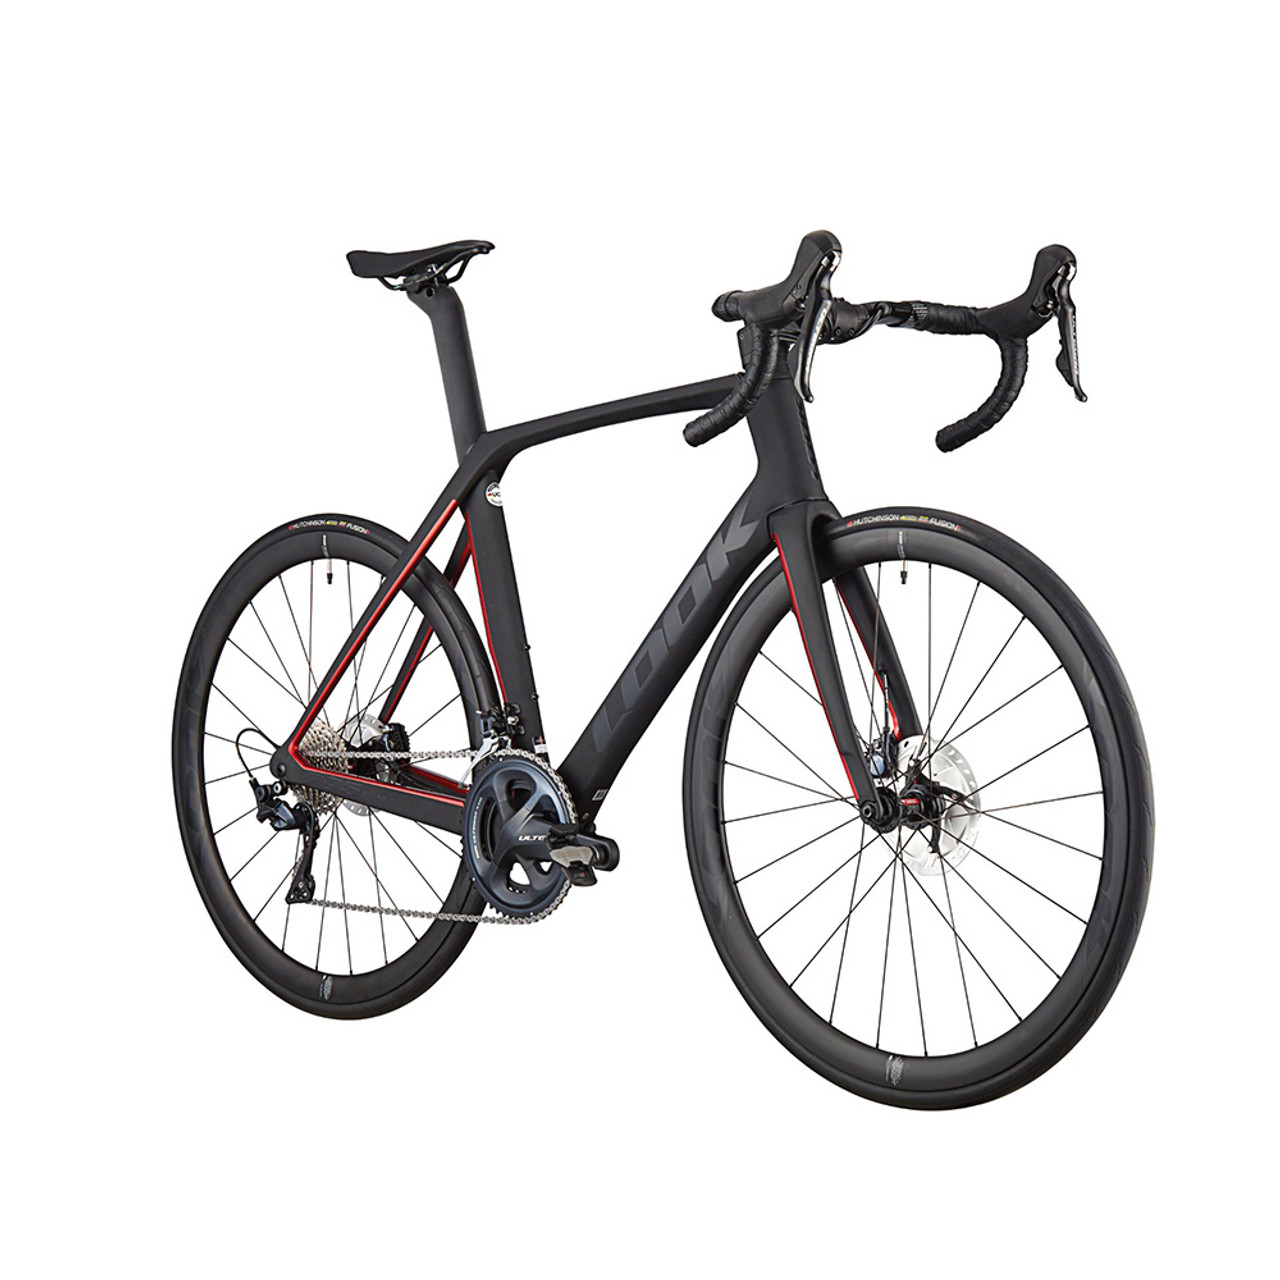 New 795 BLADE RS PROTEAM BLACK MAT GLOSSY - LOOK Cycle